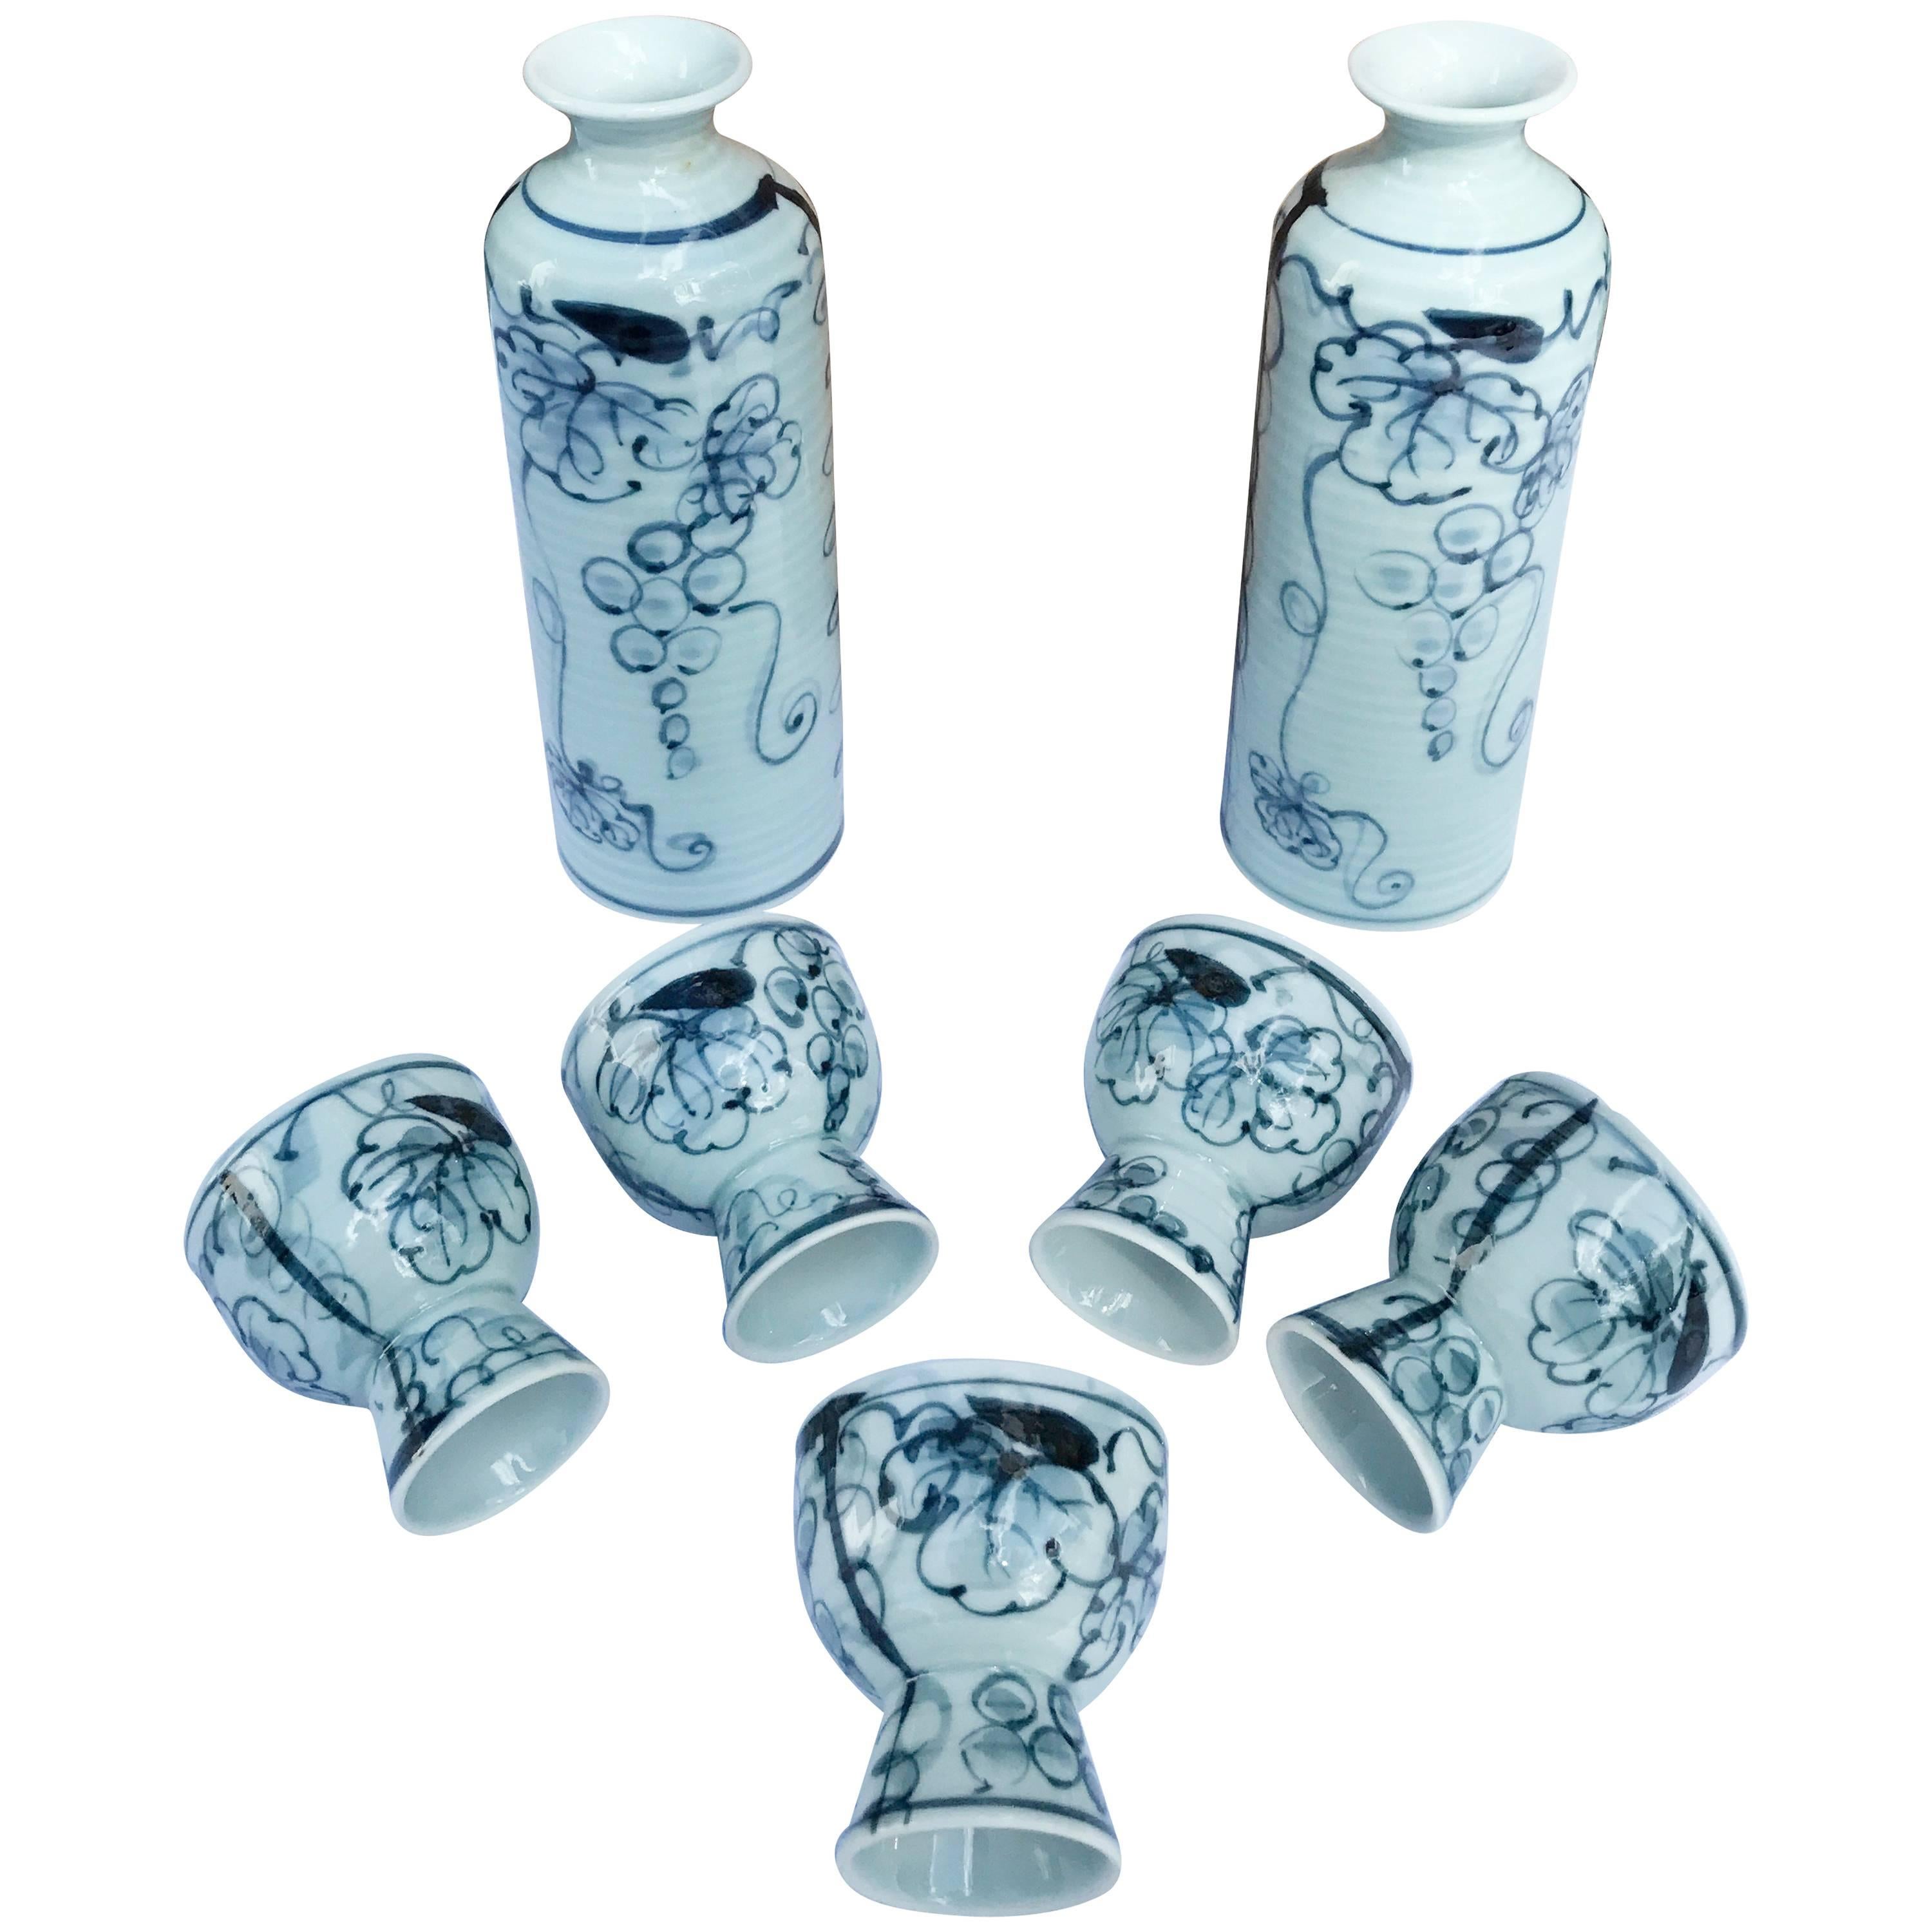 Mint, signed and boxed

Japan, a good blue and white porcelain sake service for five in an attractive grape and leaf pattern. Immediately usable.

Plus you also receive the original signed collector wooden box tomobako. 

This is a complete Japanese